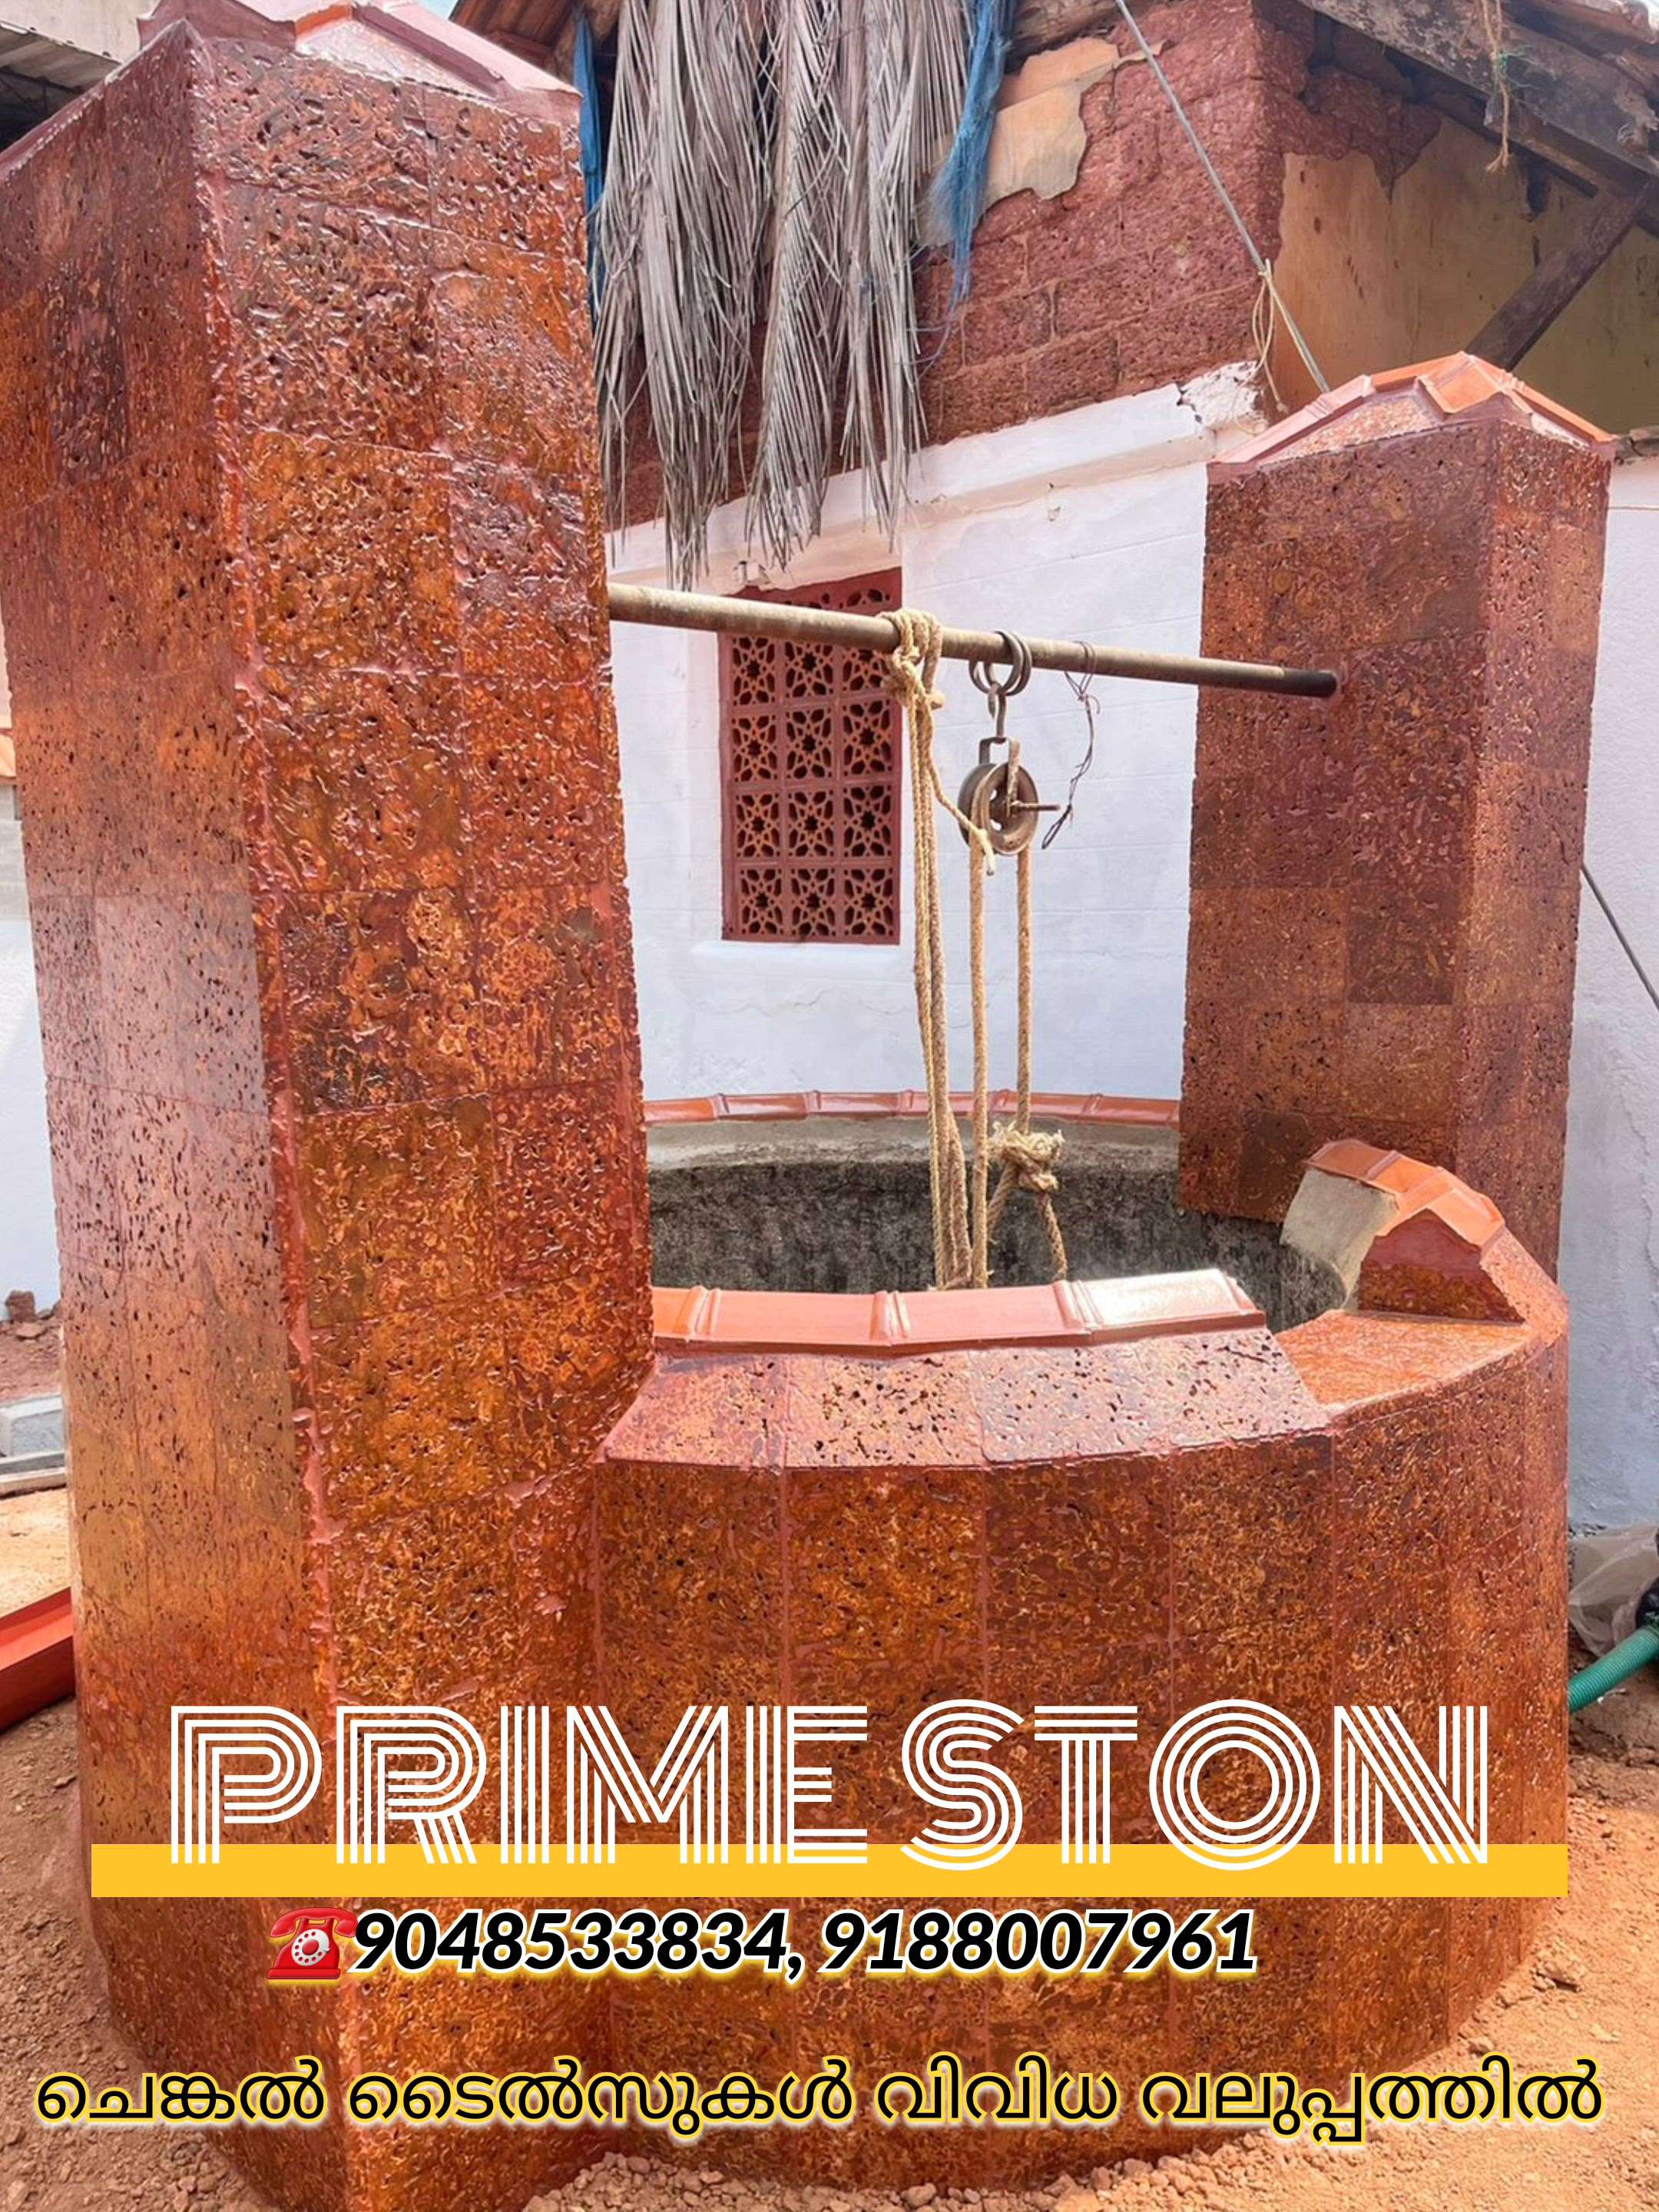 PRIME STON❤️ laterite cladding tiles# laterite slabs# laterite paving stones...
💚100% Natural Laterite Stone Products Manufacturer and laying contractor 💚
Our Service Available Allover India

Available Sizes....
12/6,12/7,15/9,18/9,21/9,24/9 inches 20 mm thickness...
Customized sizes also available...

Contact - 7306 706 542, 9188 007 961
 

primelaterite@gmail.com 
www.primestone.co. in
https://youtu.be/CtoUAPbgX08
 #primedesign_concept_for_life  #Superbrands  #LivingRoomCeilingDesign  #Architect  #Architectural&Interior  #new_home  #newsite  #KeralaStyleHouse  #TraditionalStyle